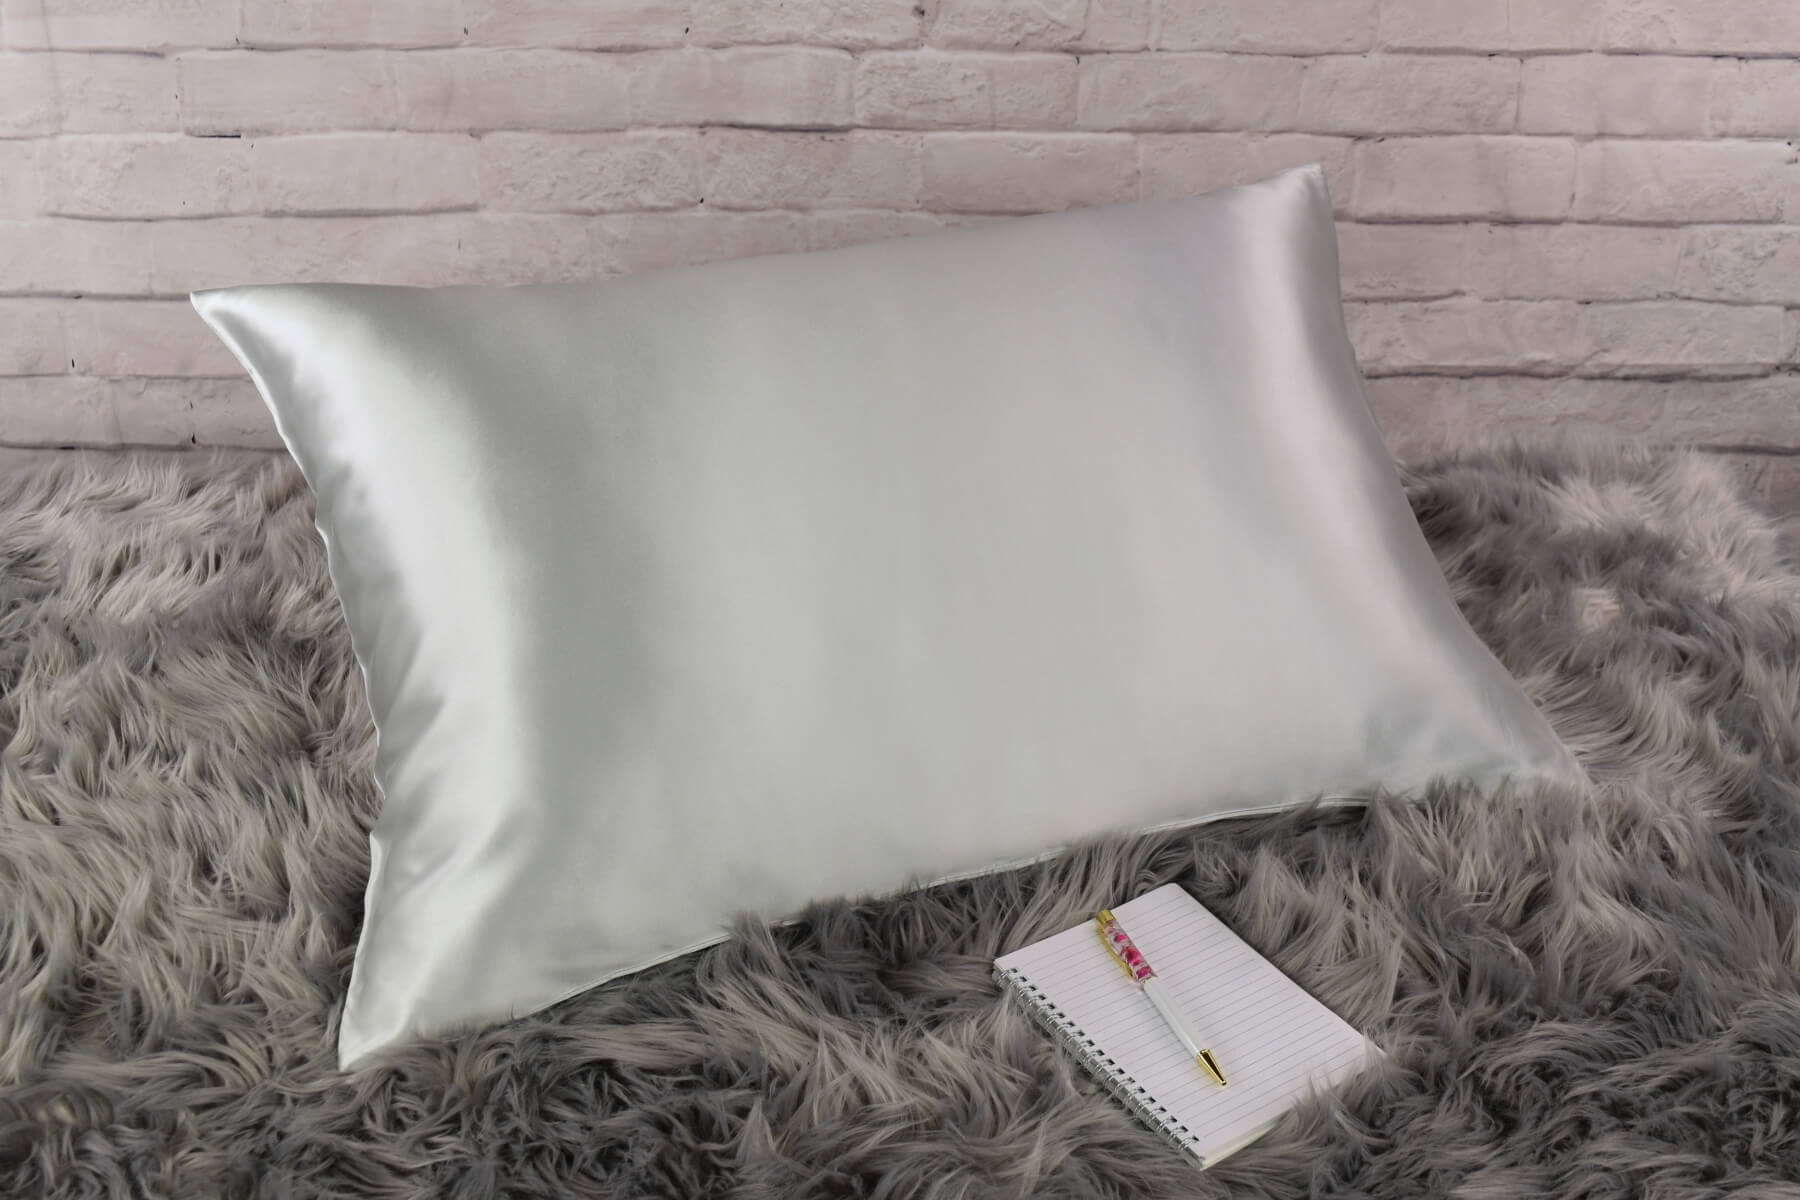 Celestial Silk 25 momme silver silk pillowcase on faux fur rug with notebook and pretty pen